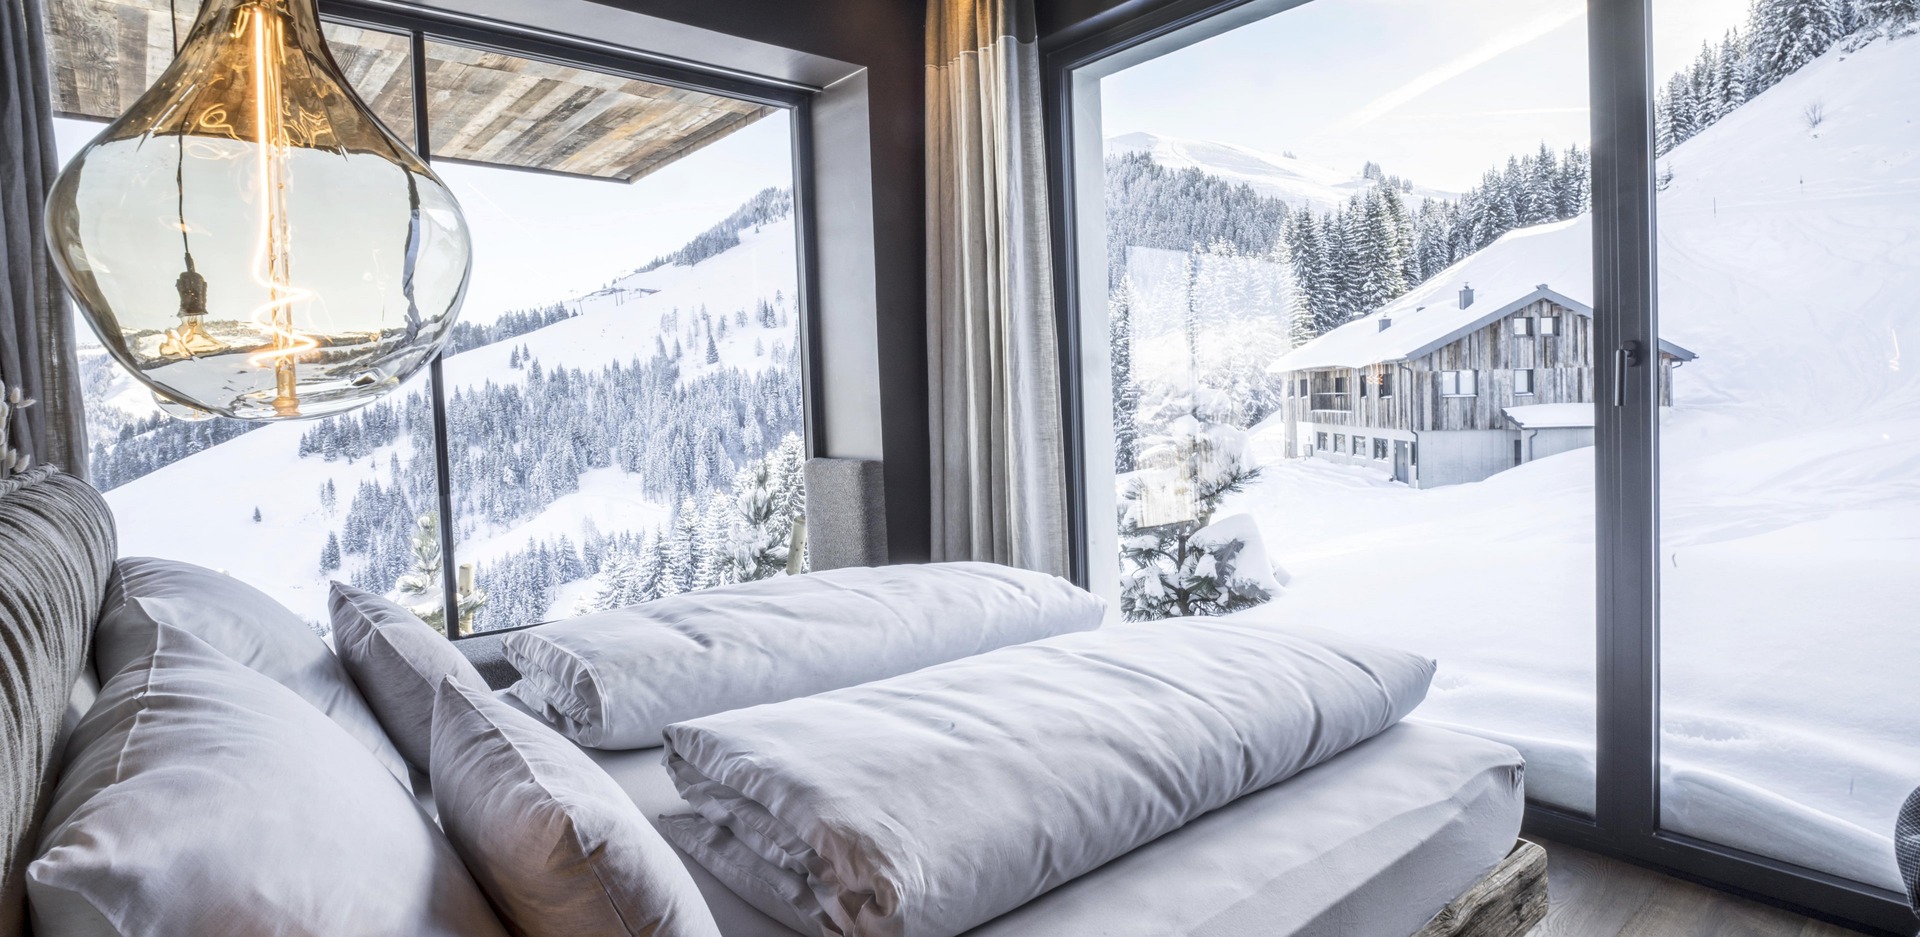 Hotel Kraftalm Itter Hotel room Double room with panoramic window and mountainous panoramic view from the Wilder Kaiser to the Hohe Salve